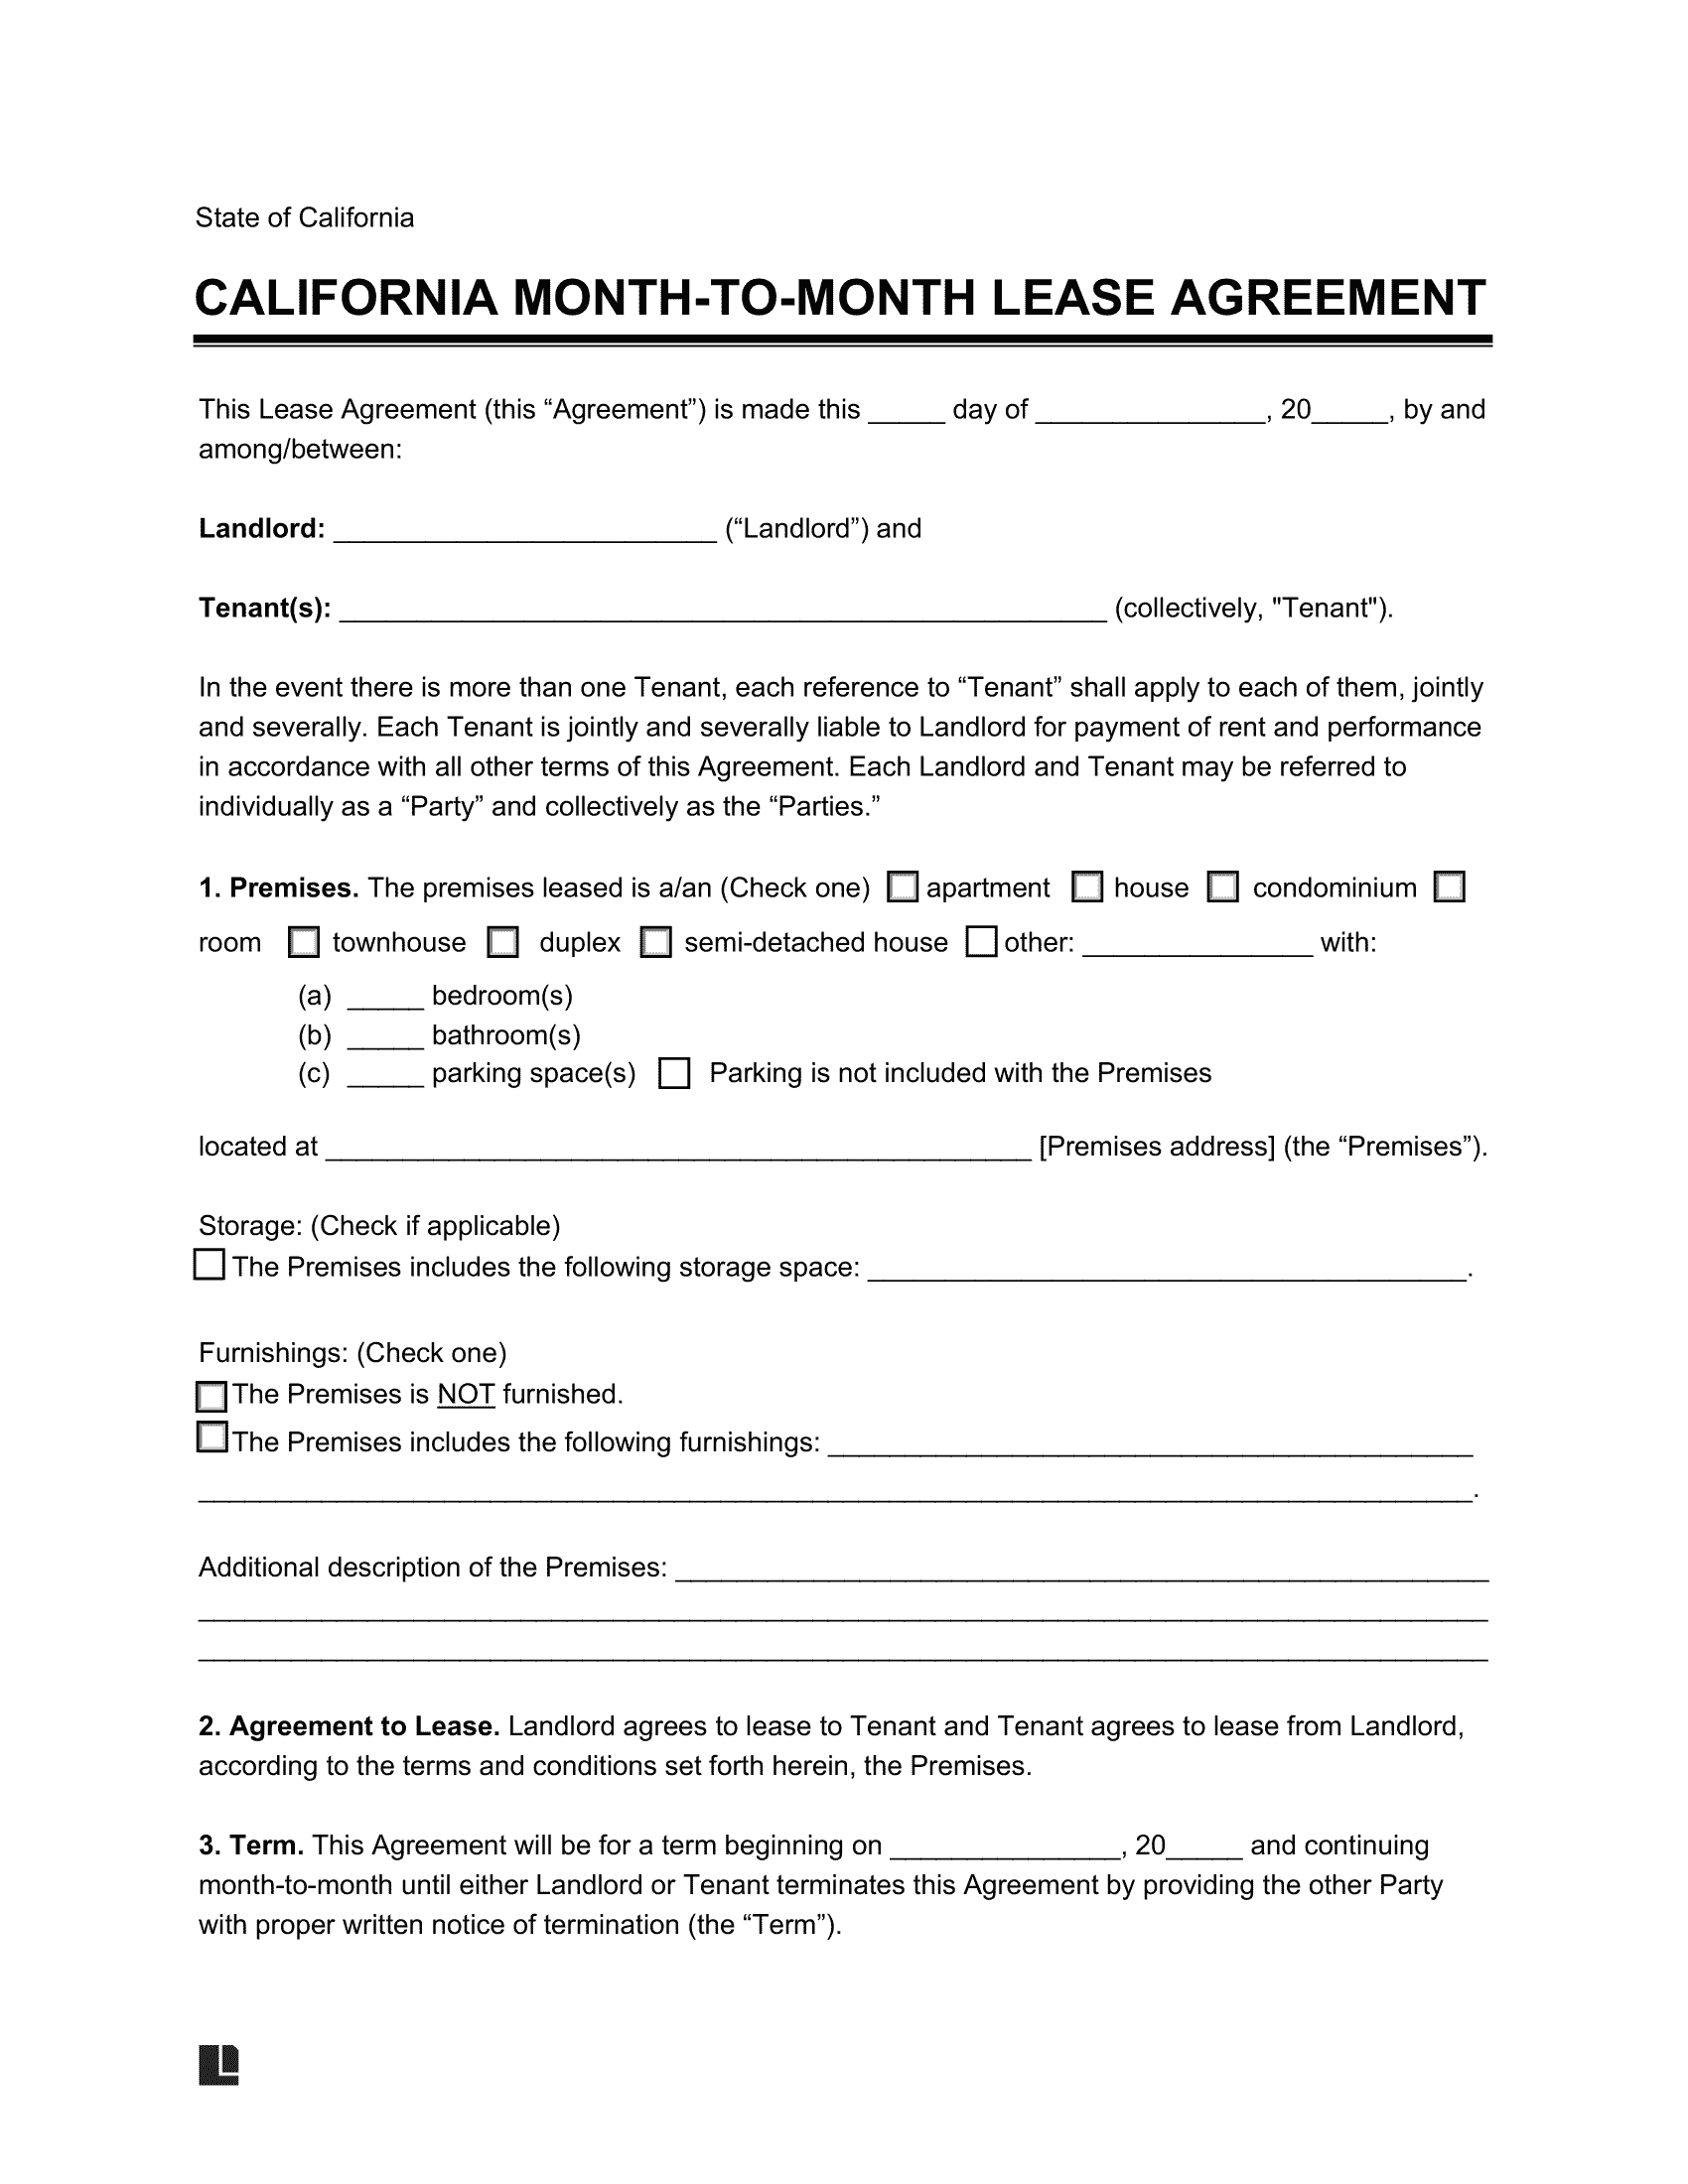 California Month-to-Month Rental Agreement